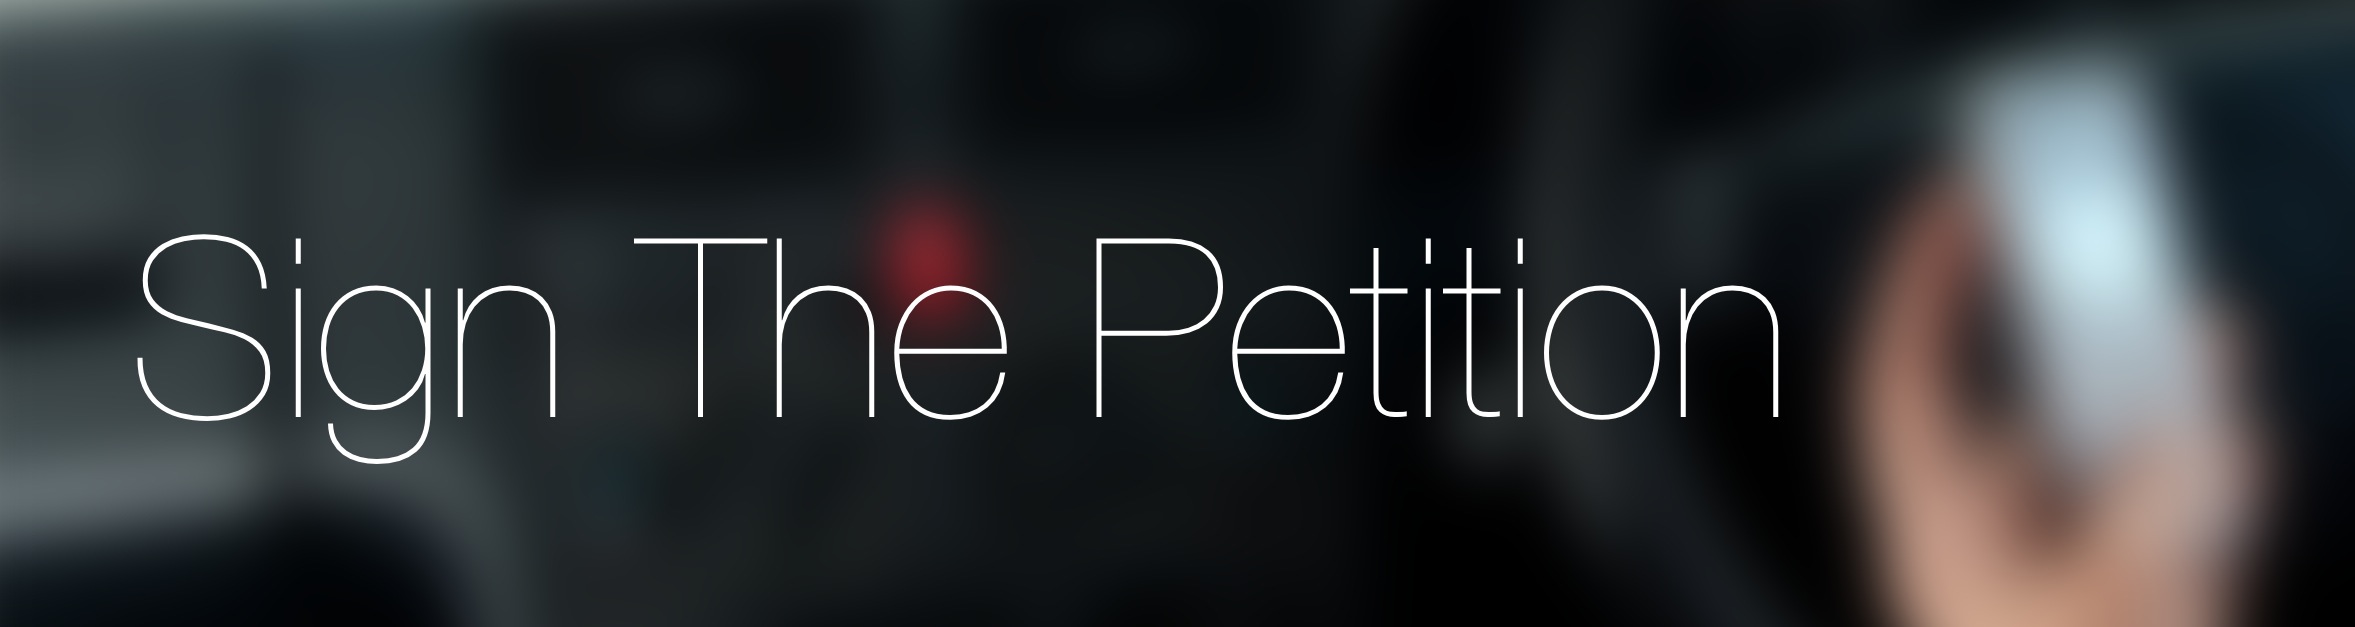 Sign The Petitition